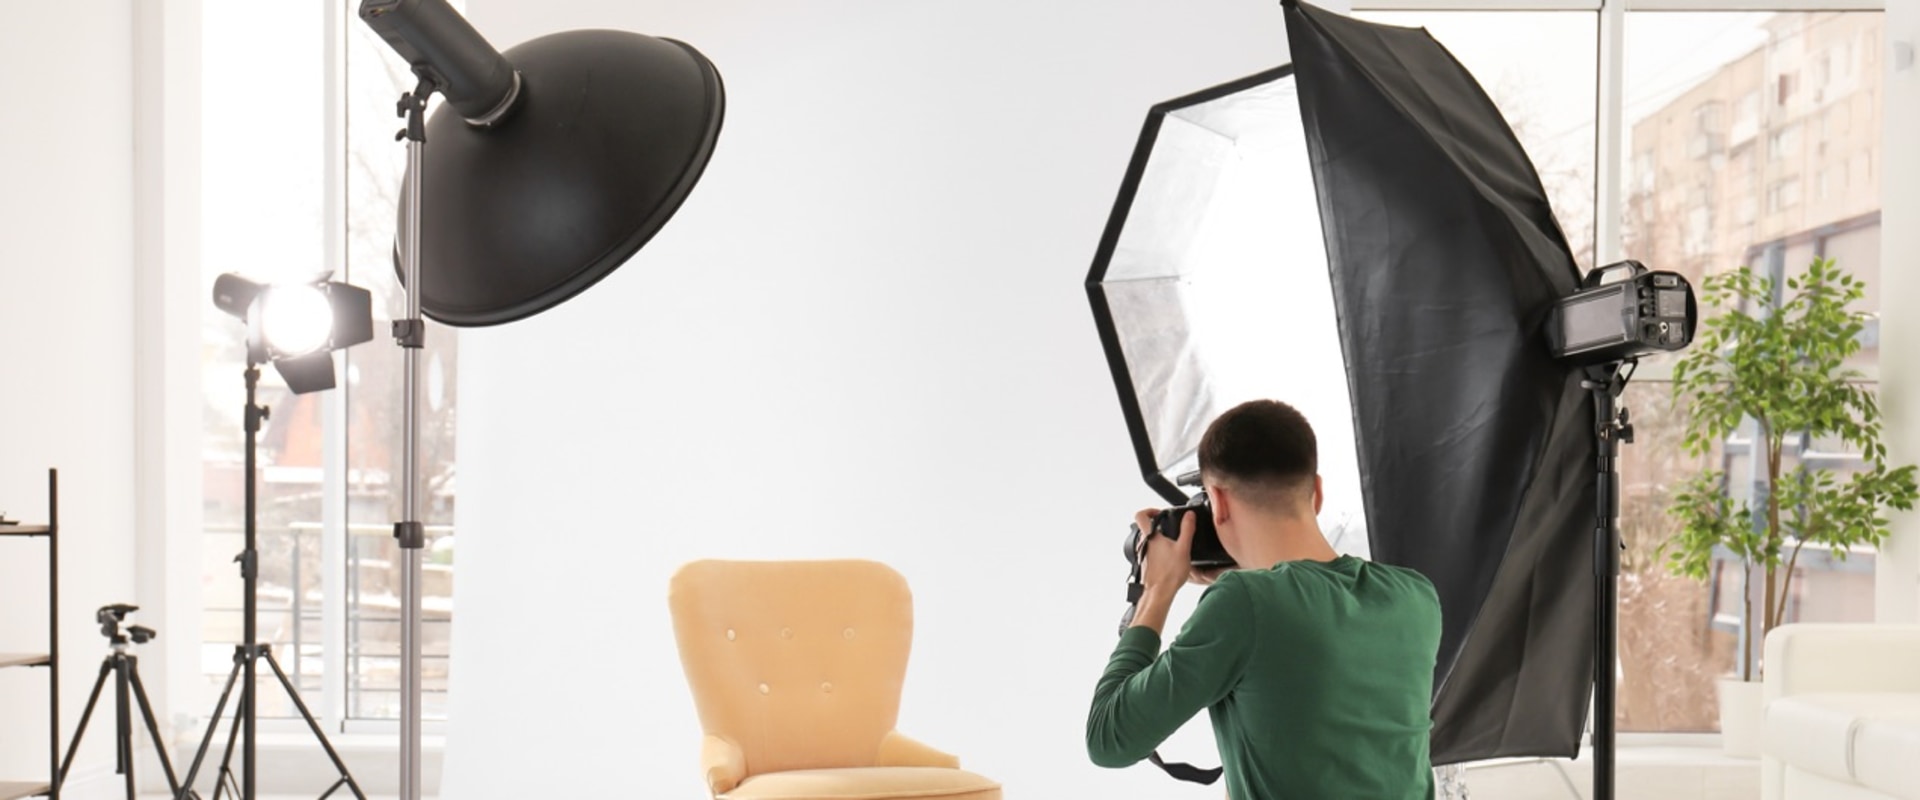 What is the type of ecommerce product photography?